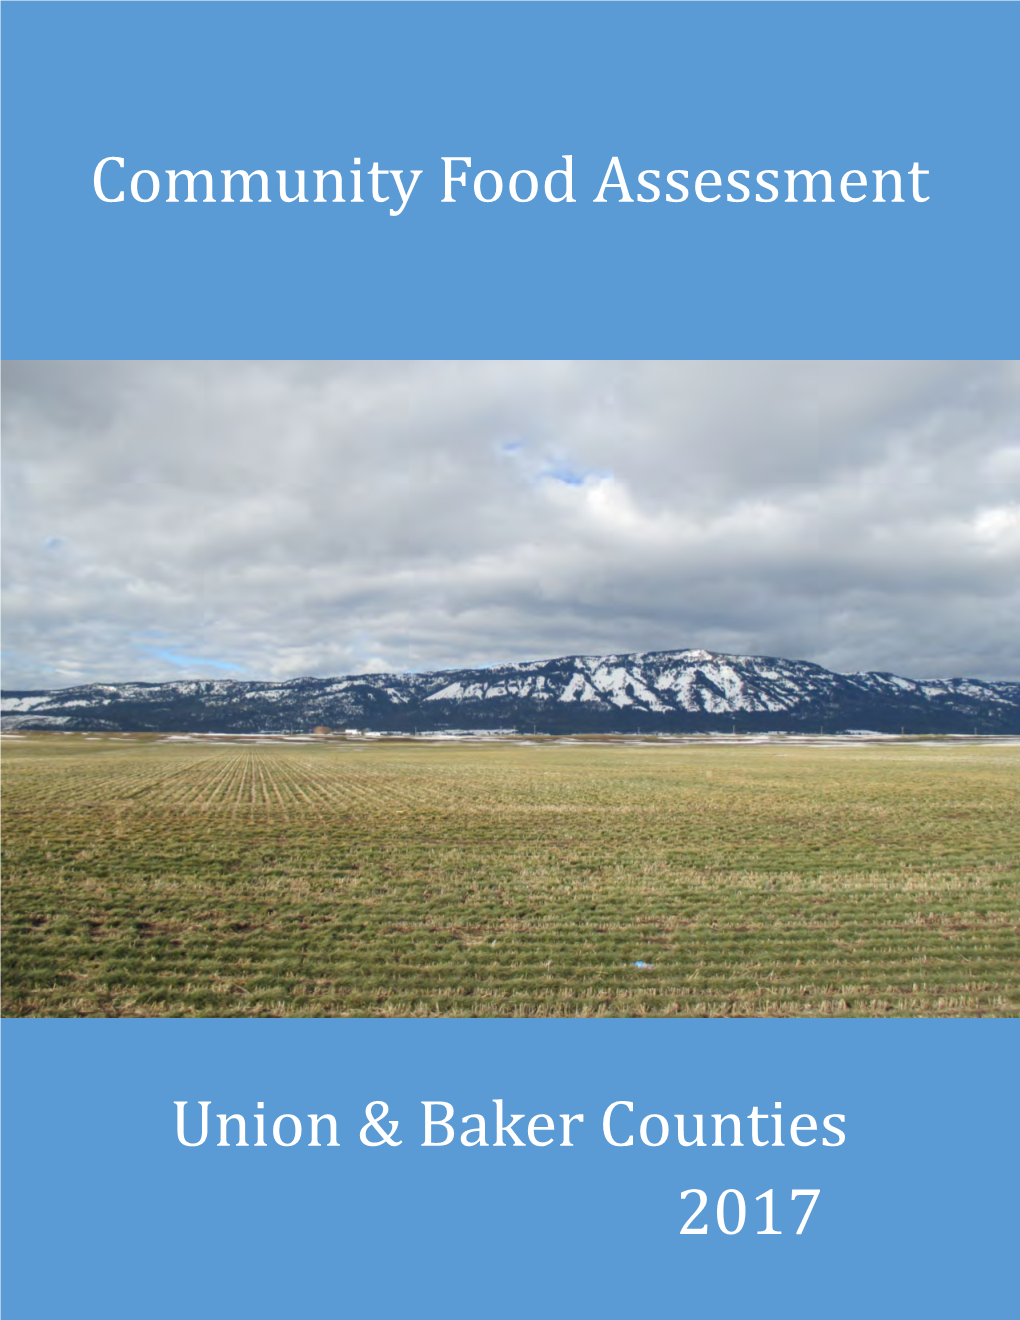 Community Food Assessment Union & Baker Counties 2017